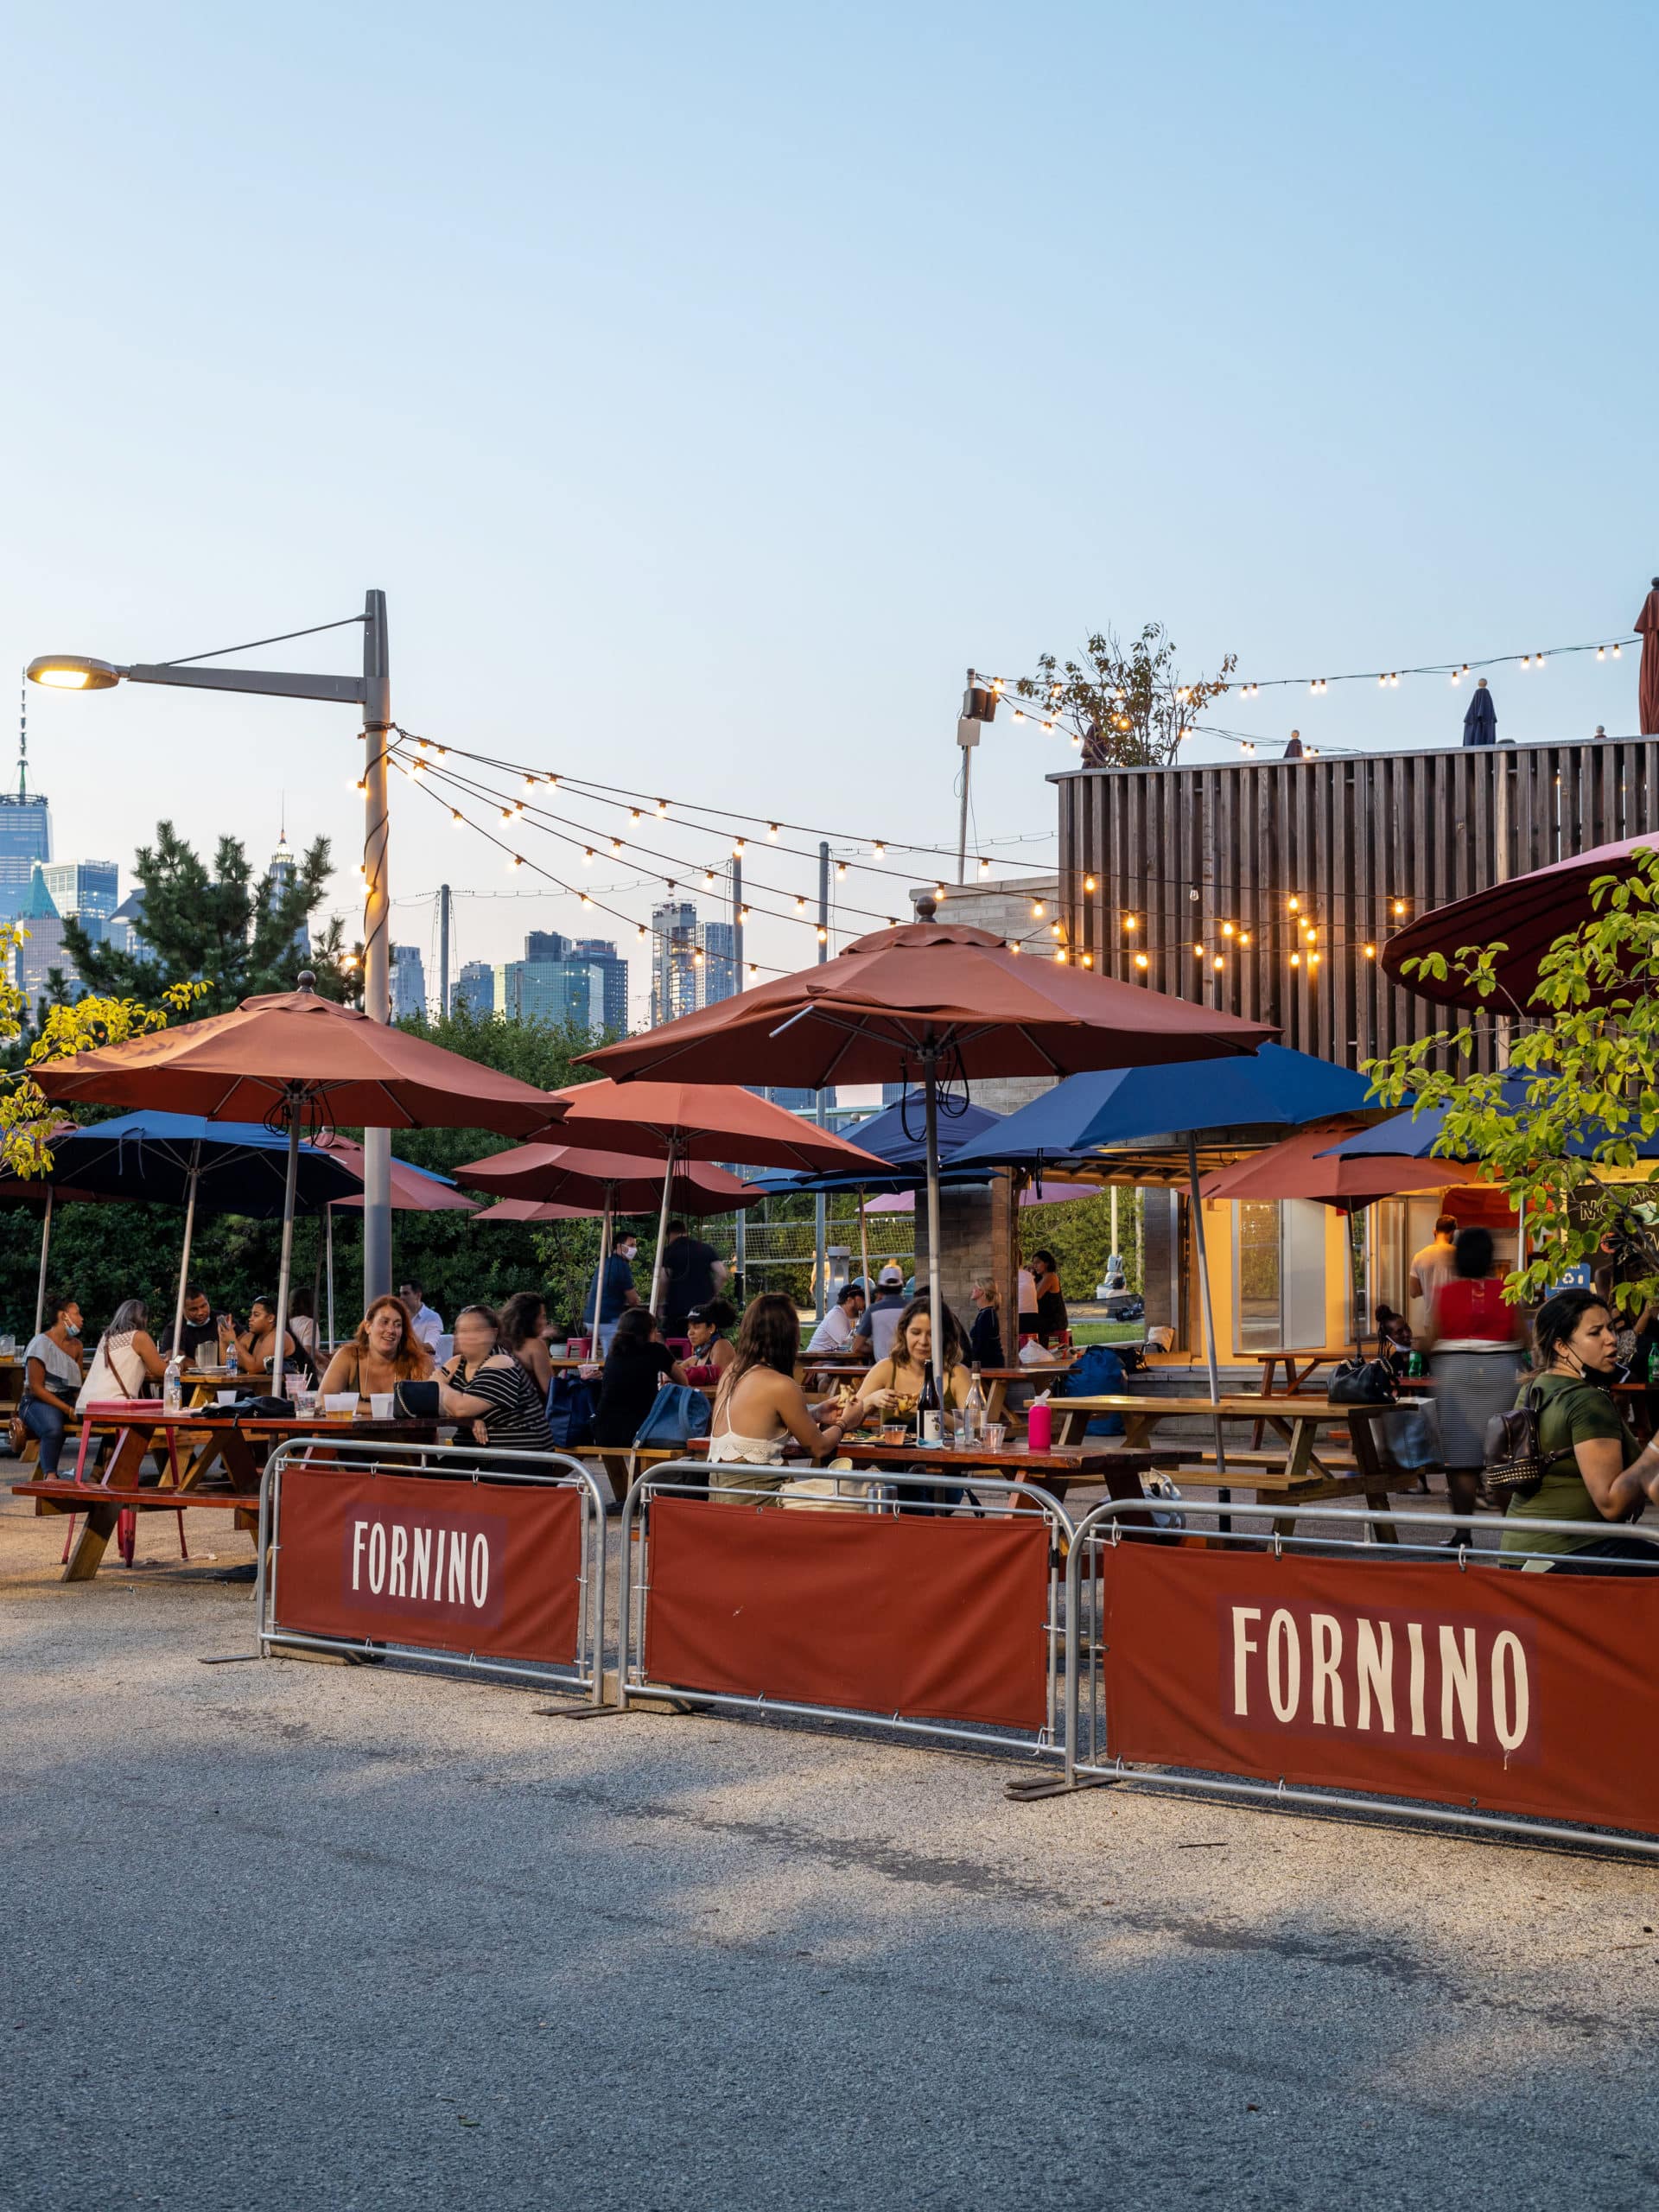 People eating outside under umbrellas at Fornino at sunset.